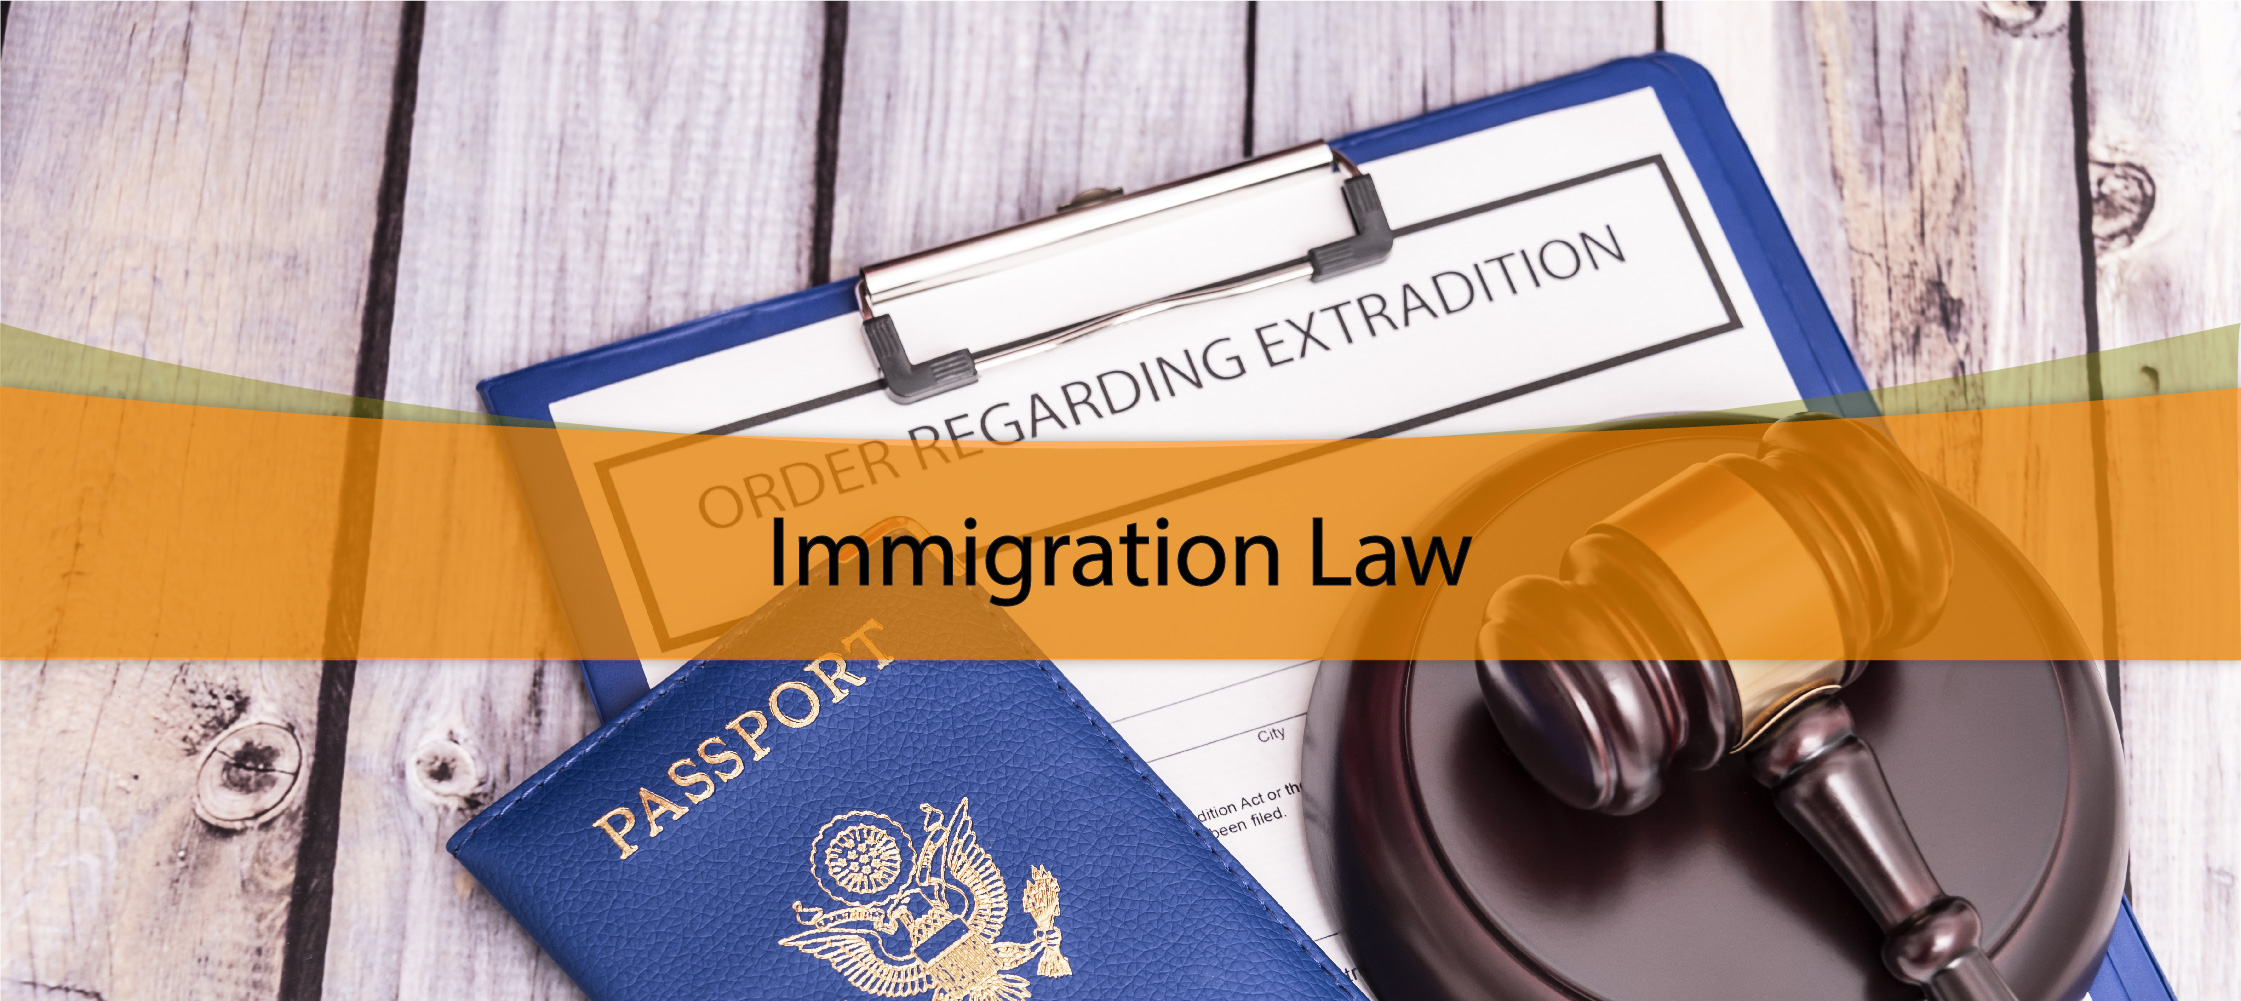 Immigration Law Firm Names